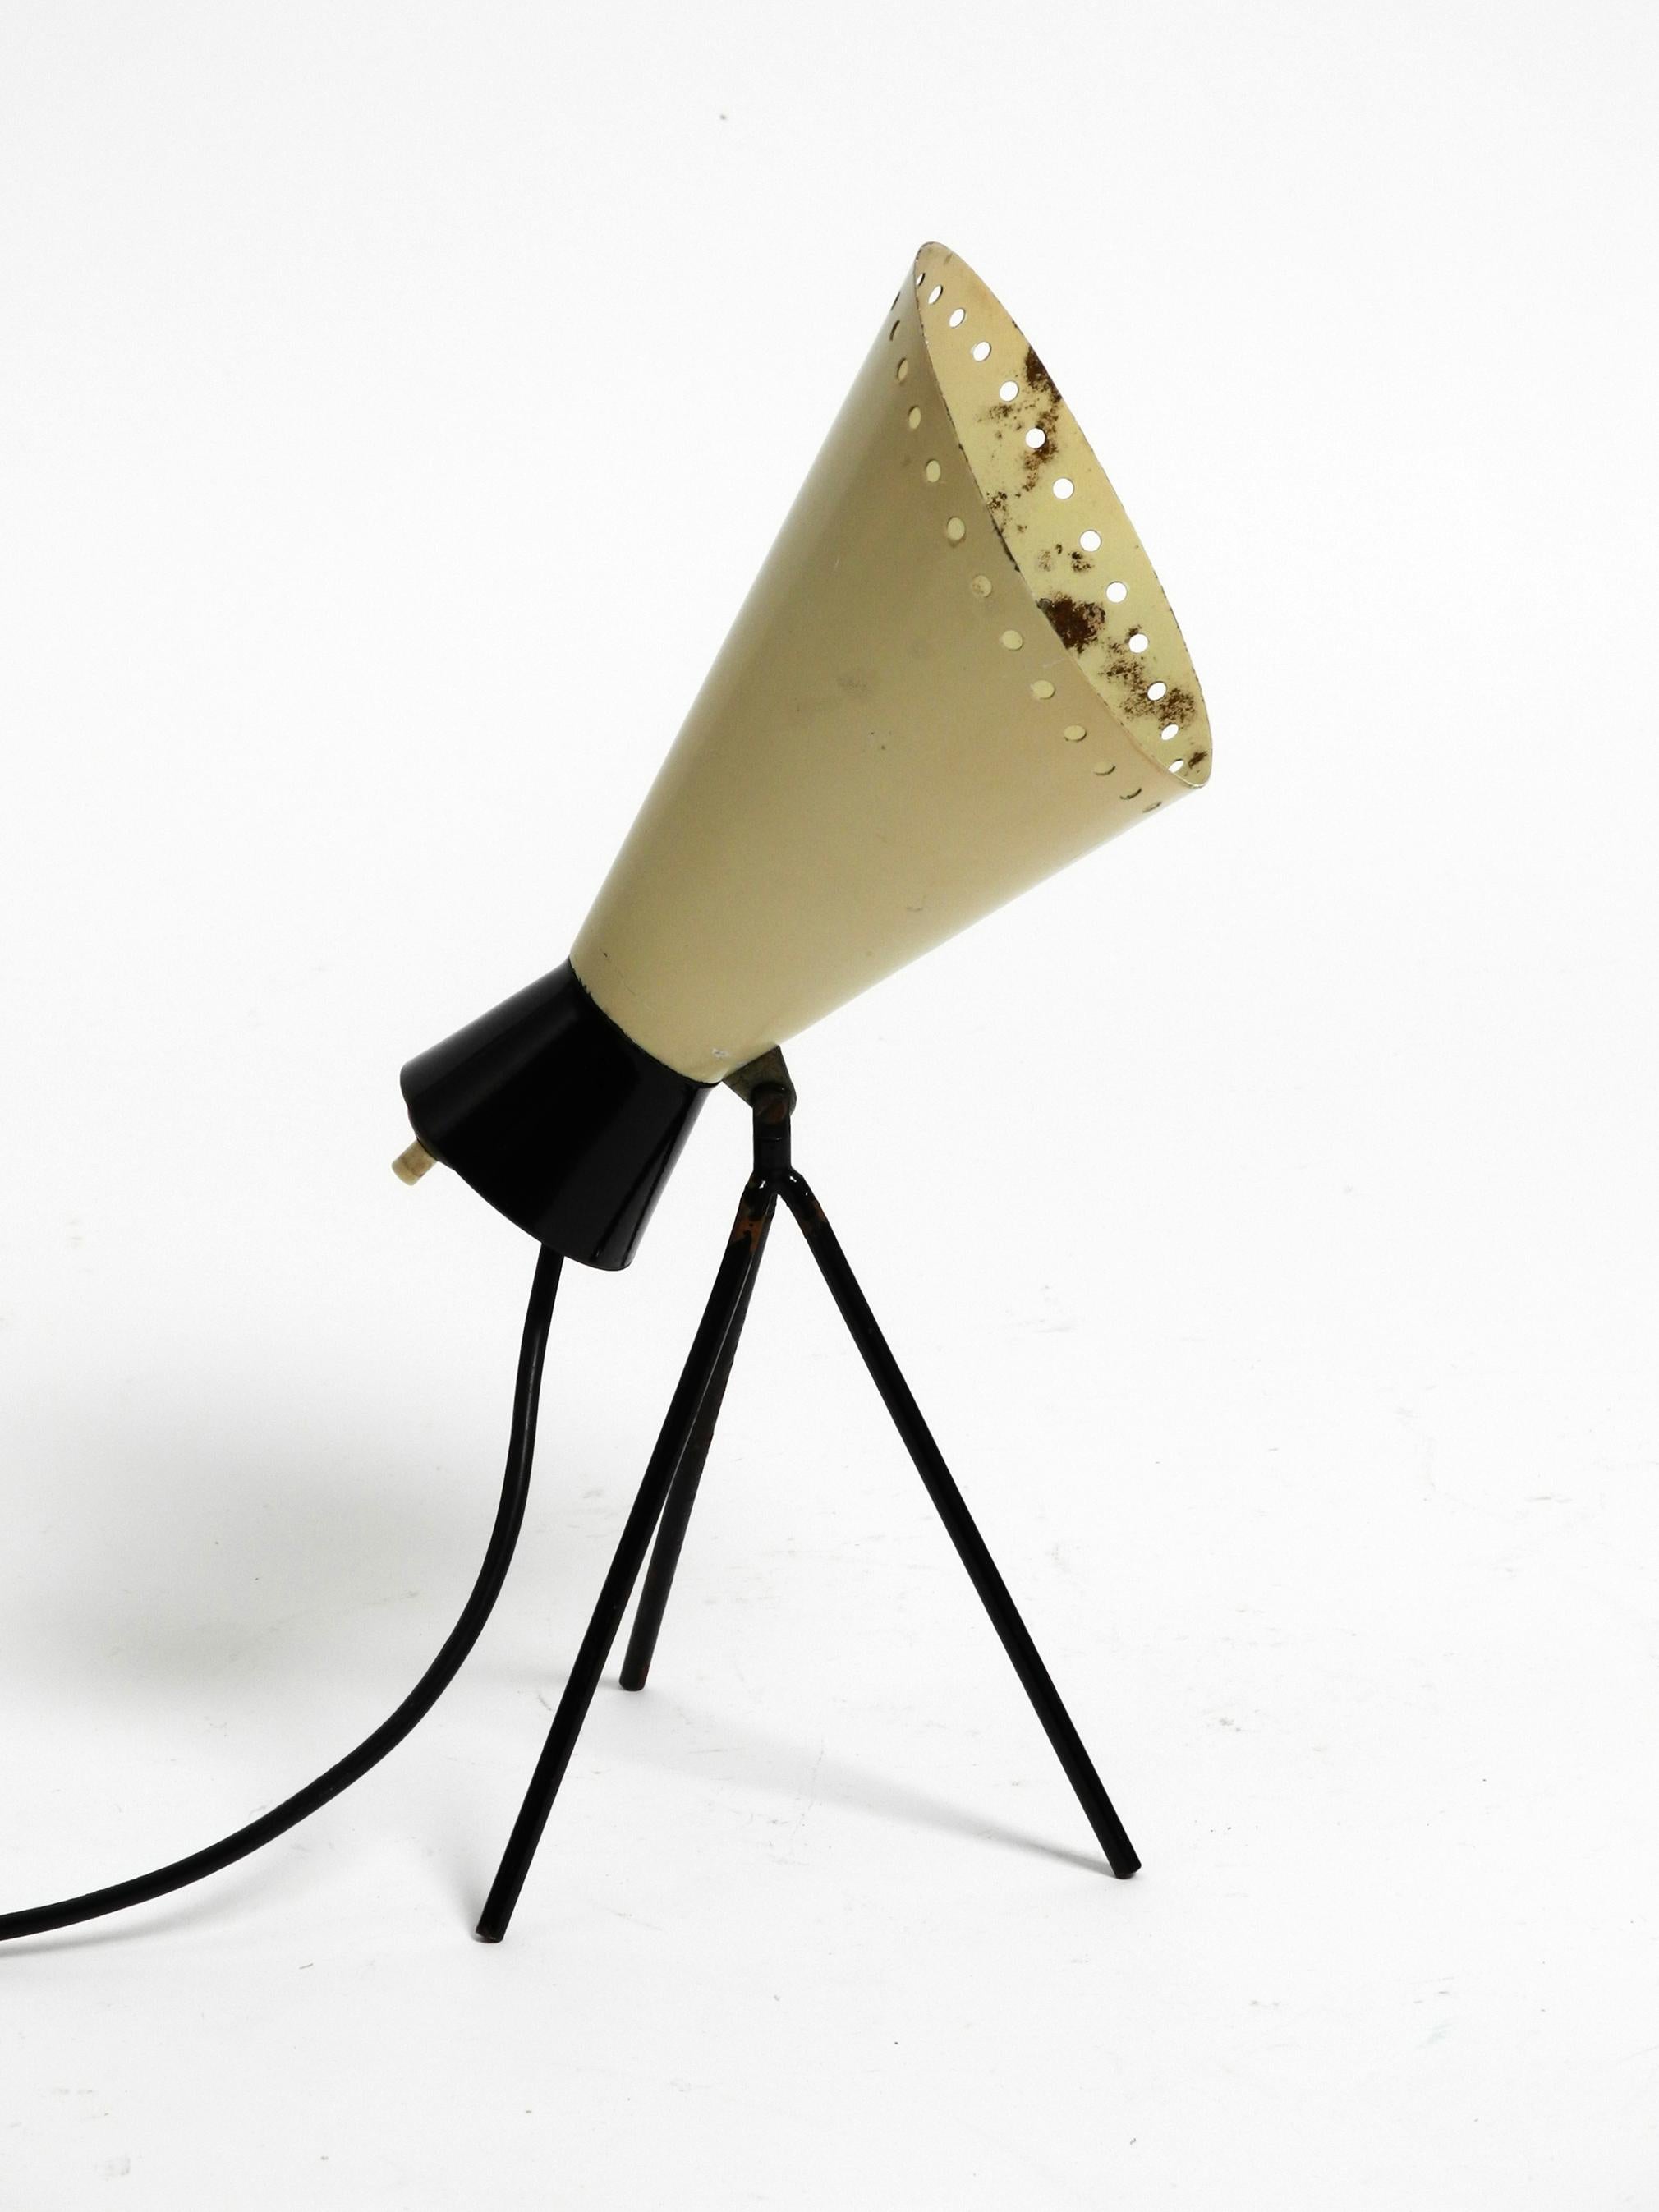 Great Mid Century Modern tripod table lamp by Josef Hurka for Napako Czech In Good Condition For Sale In München, DE